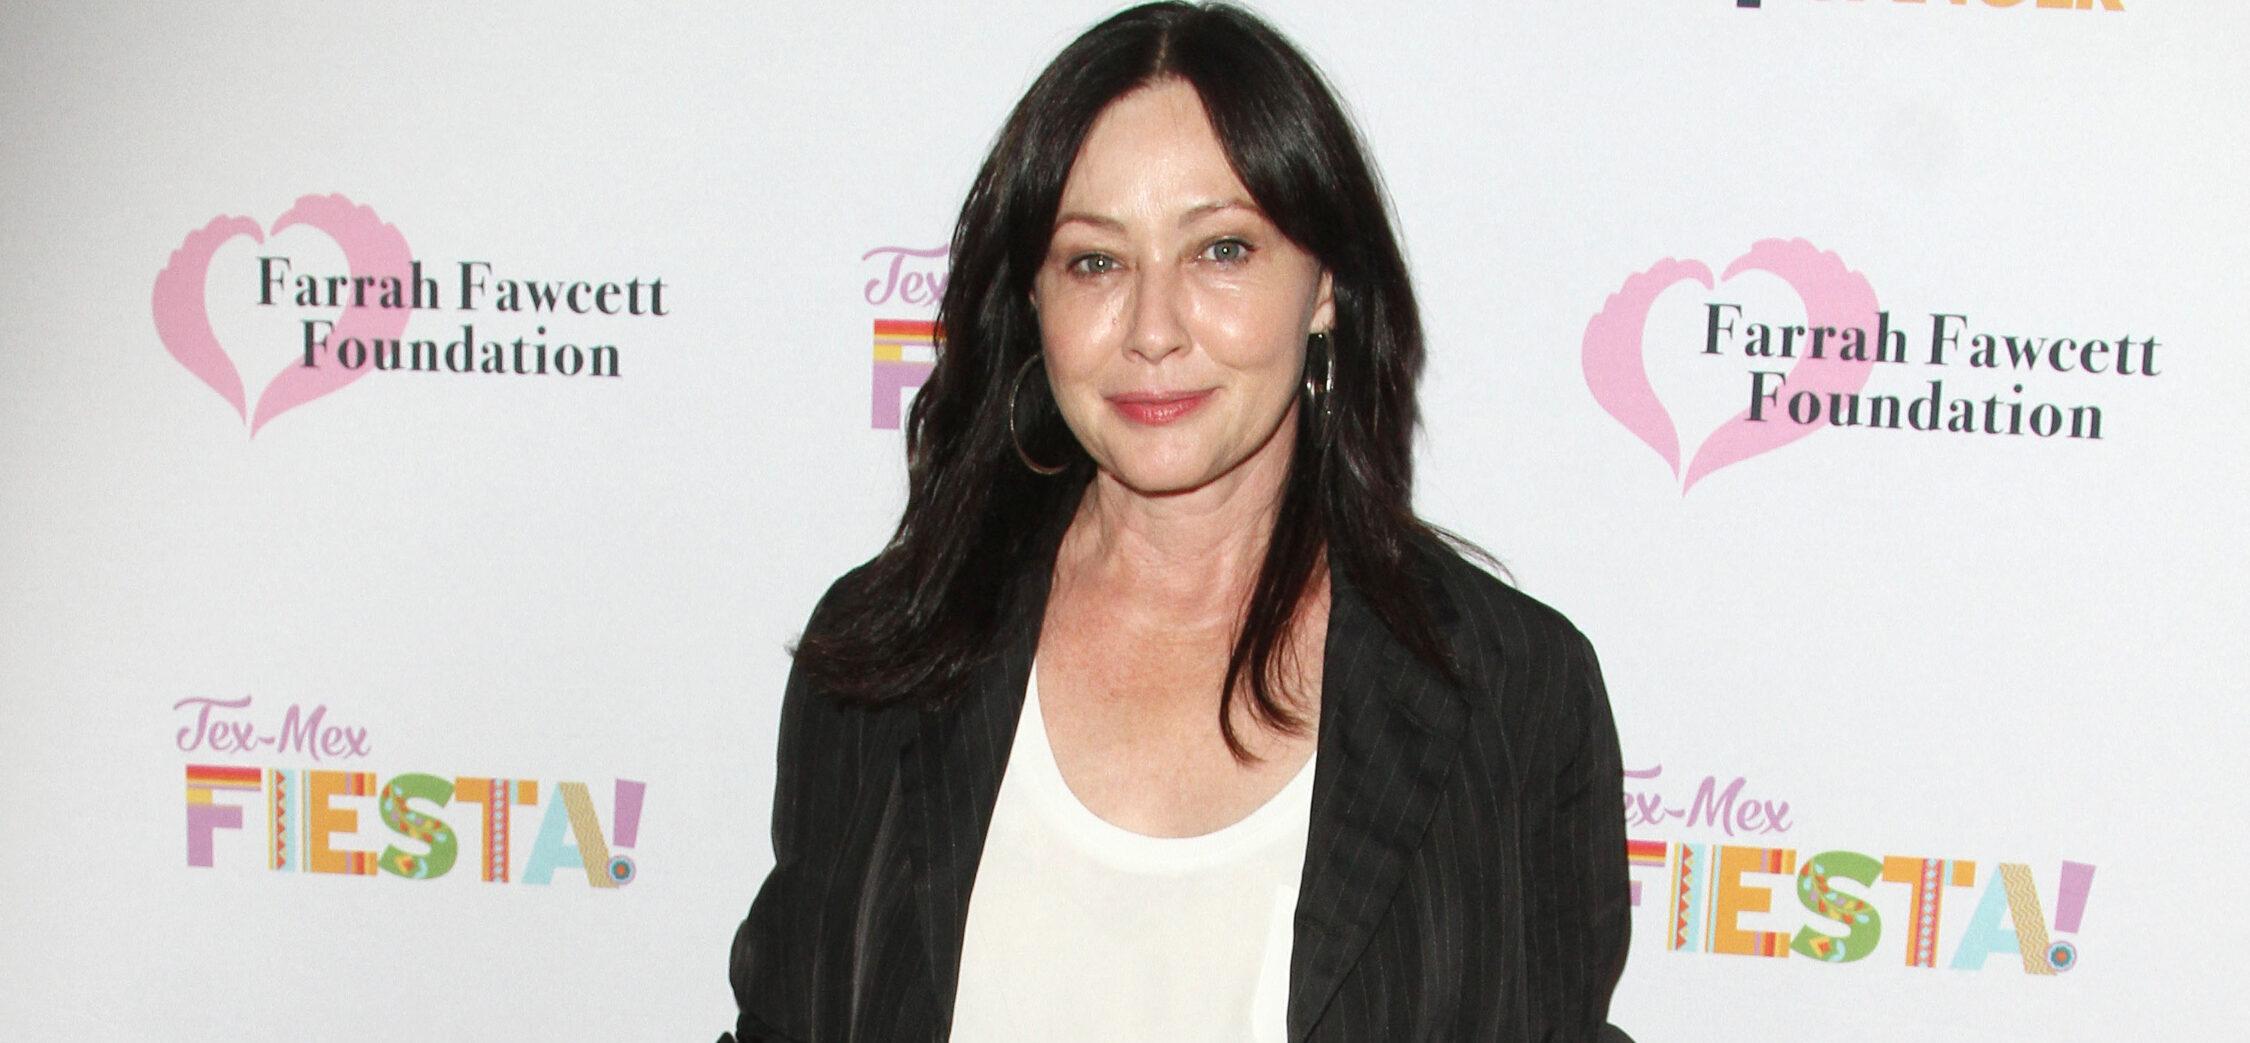 Shannen Doherty Seen Enjoying Vacation In Italy Amid Cancer Battle & Contentious Divorce